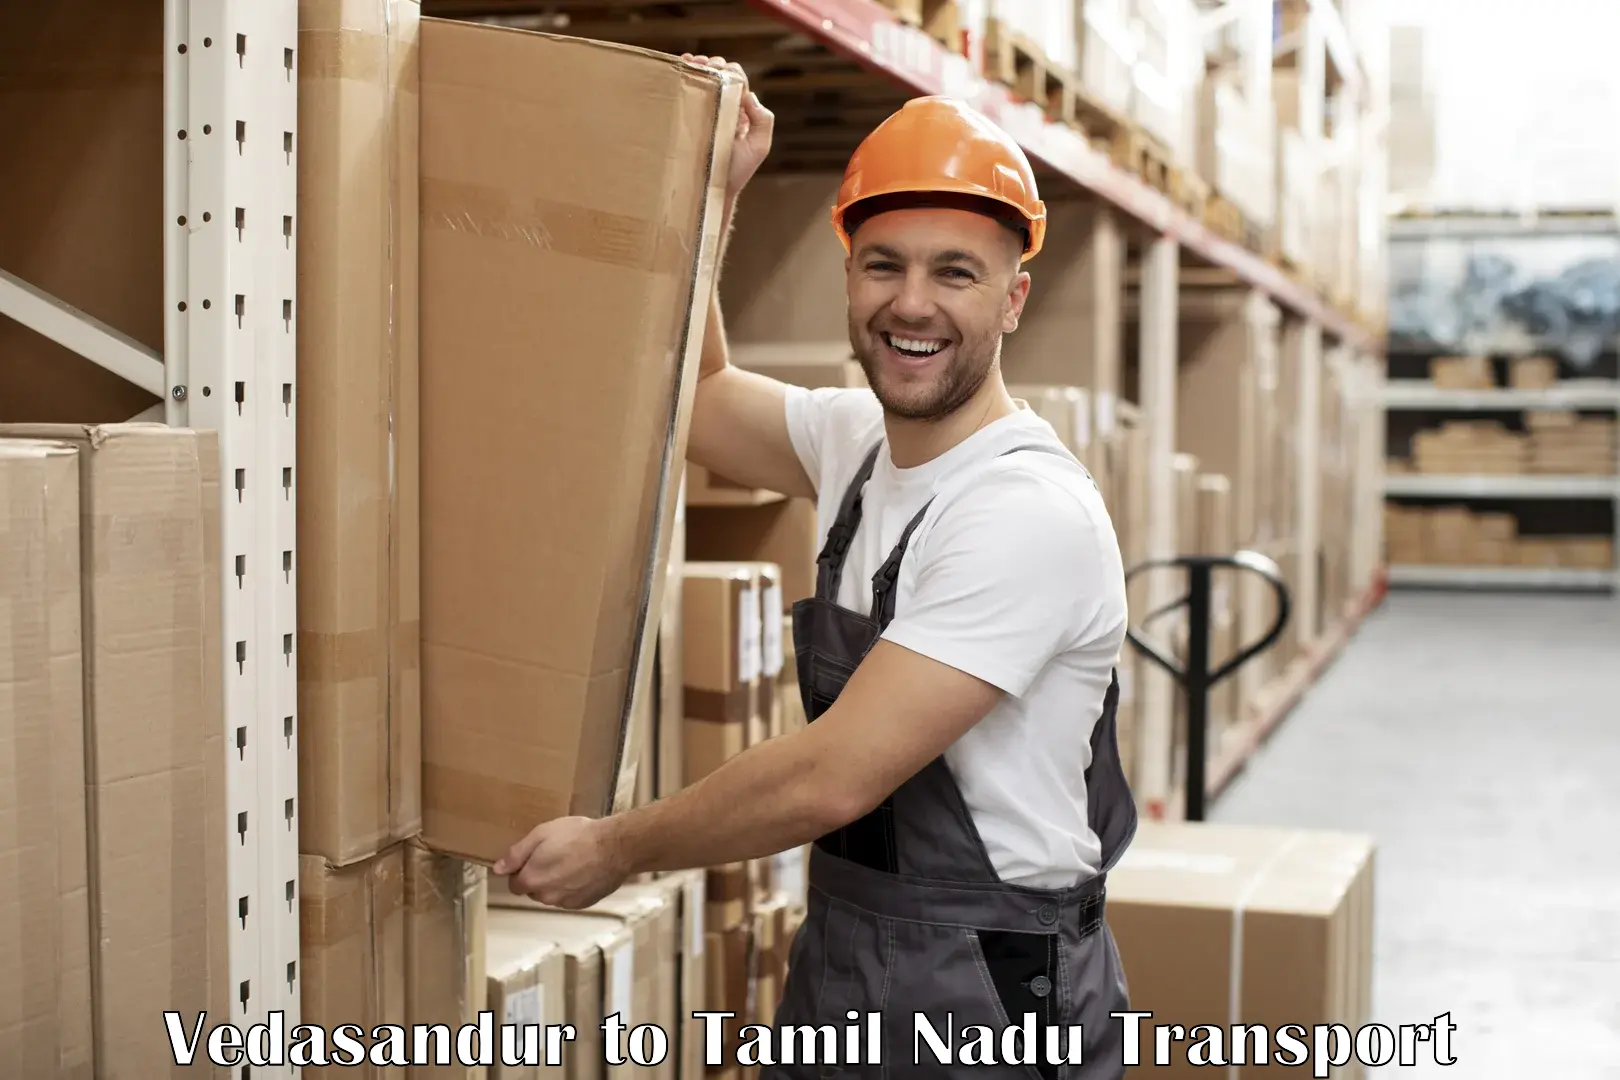 Truck transport companies in India in Vedasandur to Palani